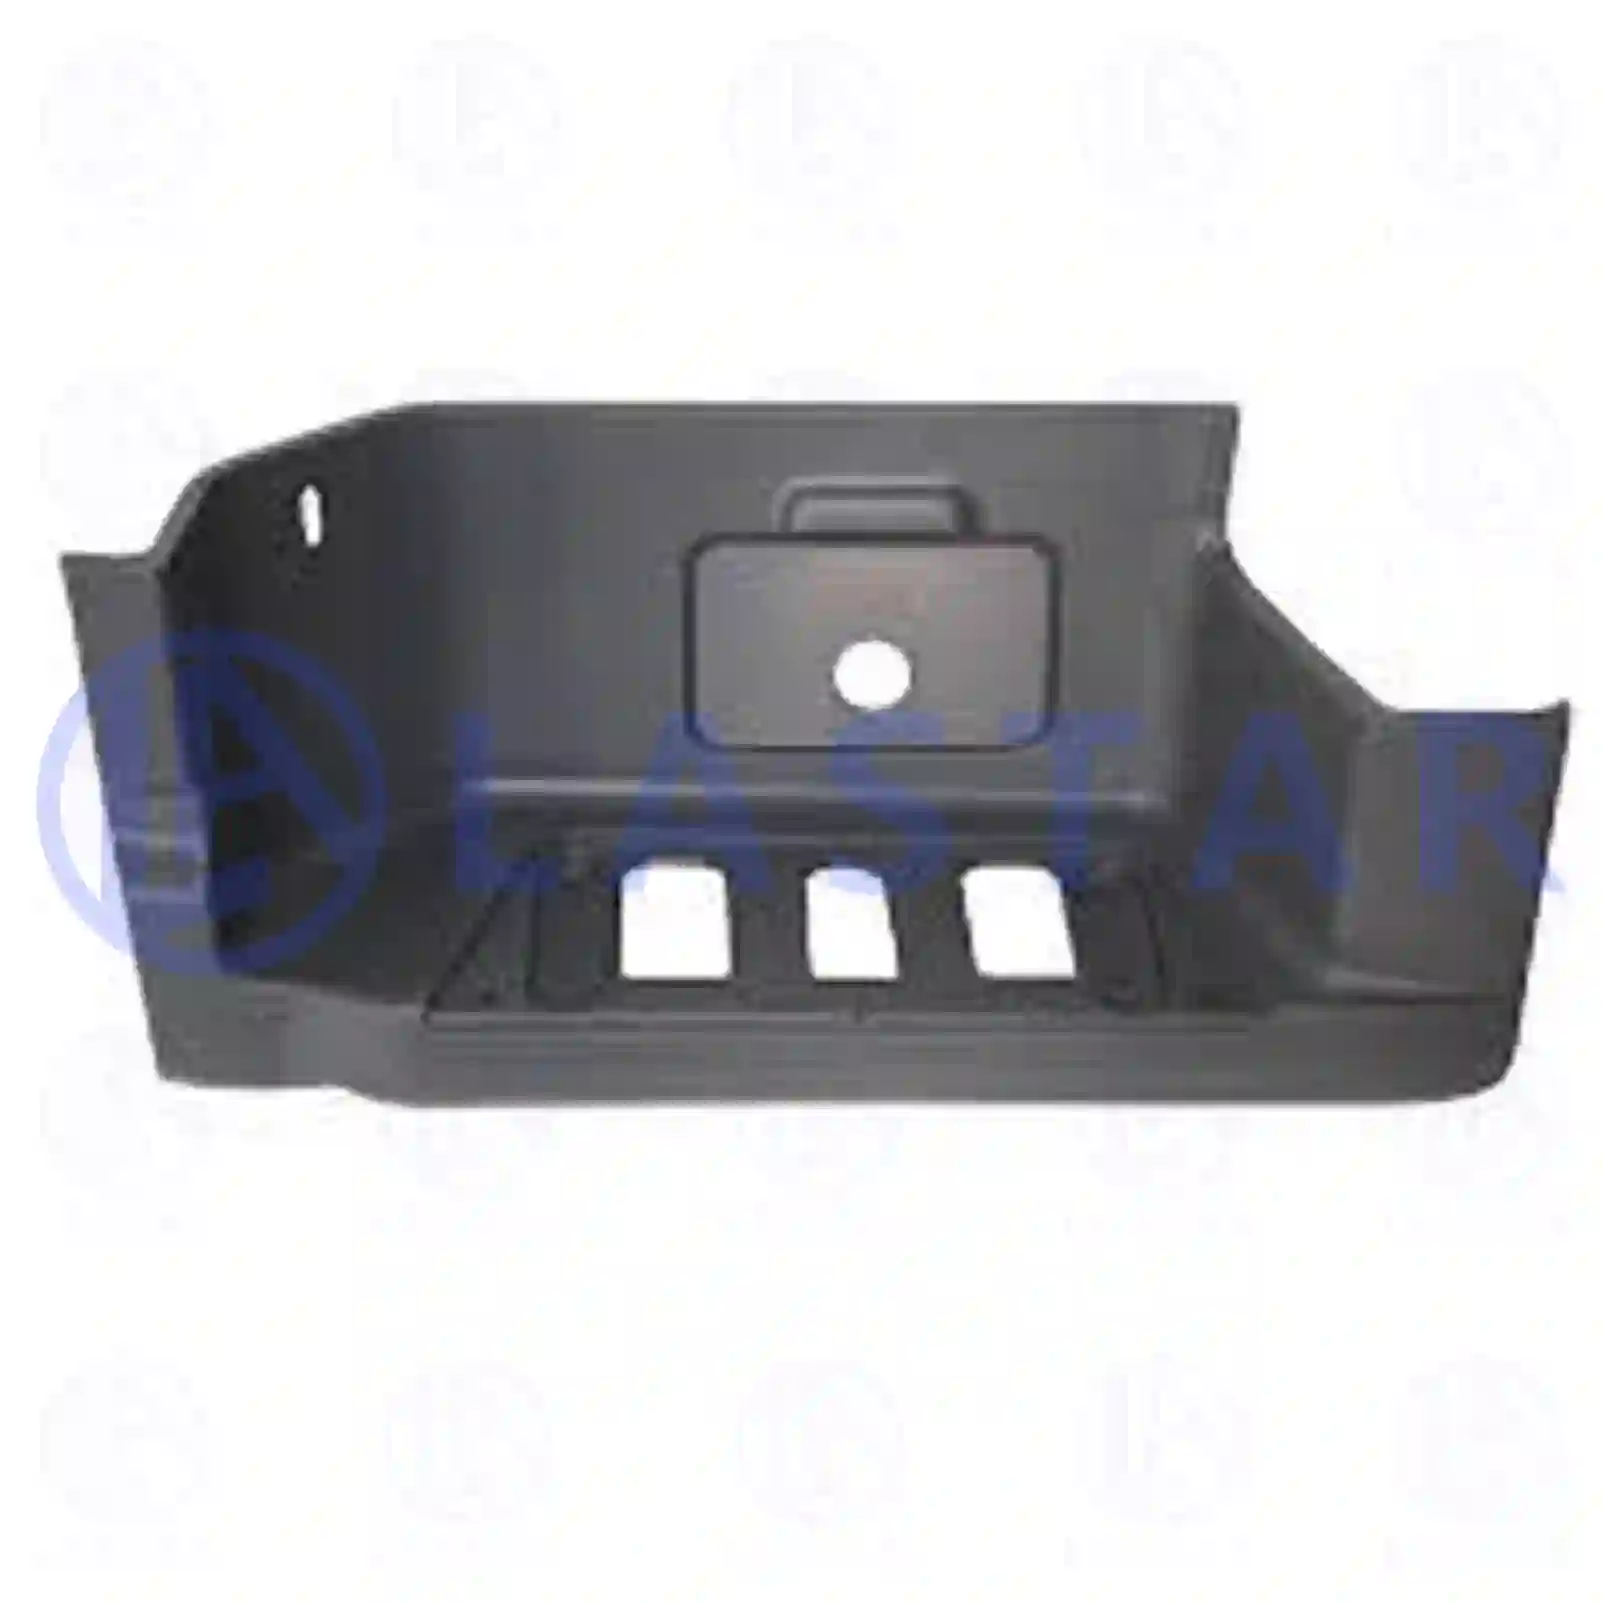 Step well case, lower, left, 77719019, 9436600801, 94366008017354, ZG61207-0008 ||  77719019 Lastar Spare Part | Truck Spare Parts, Auotomotive Spare Parts Step well case, lower, left, 77719019, 9436600801, 94366008017354, ZG61207-0008 ||  77719019 Lastar Spare Part | Truck Spare Parts, Auotomotive Spare Parts